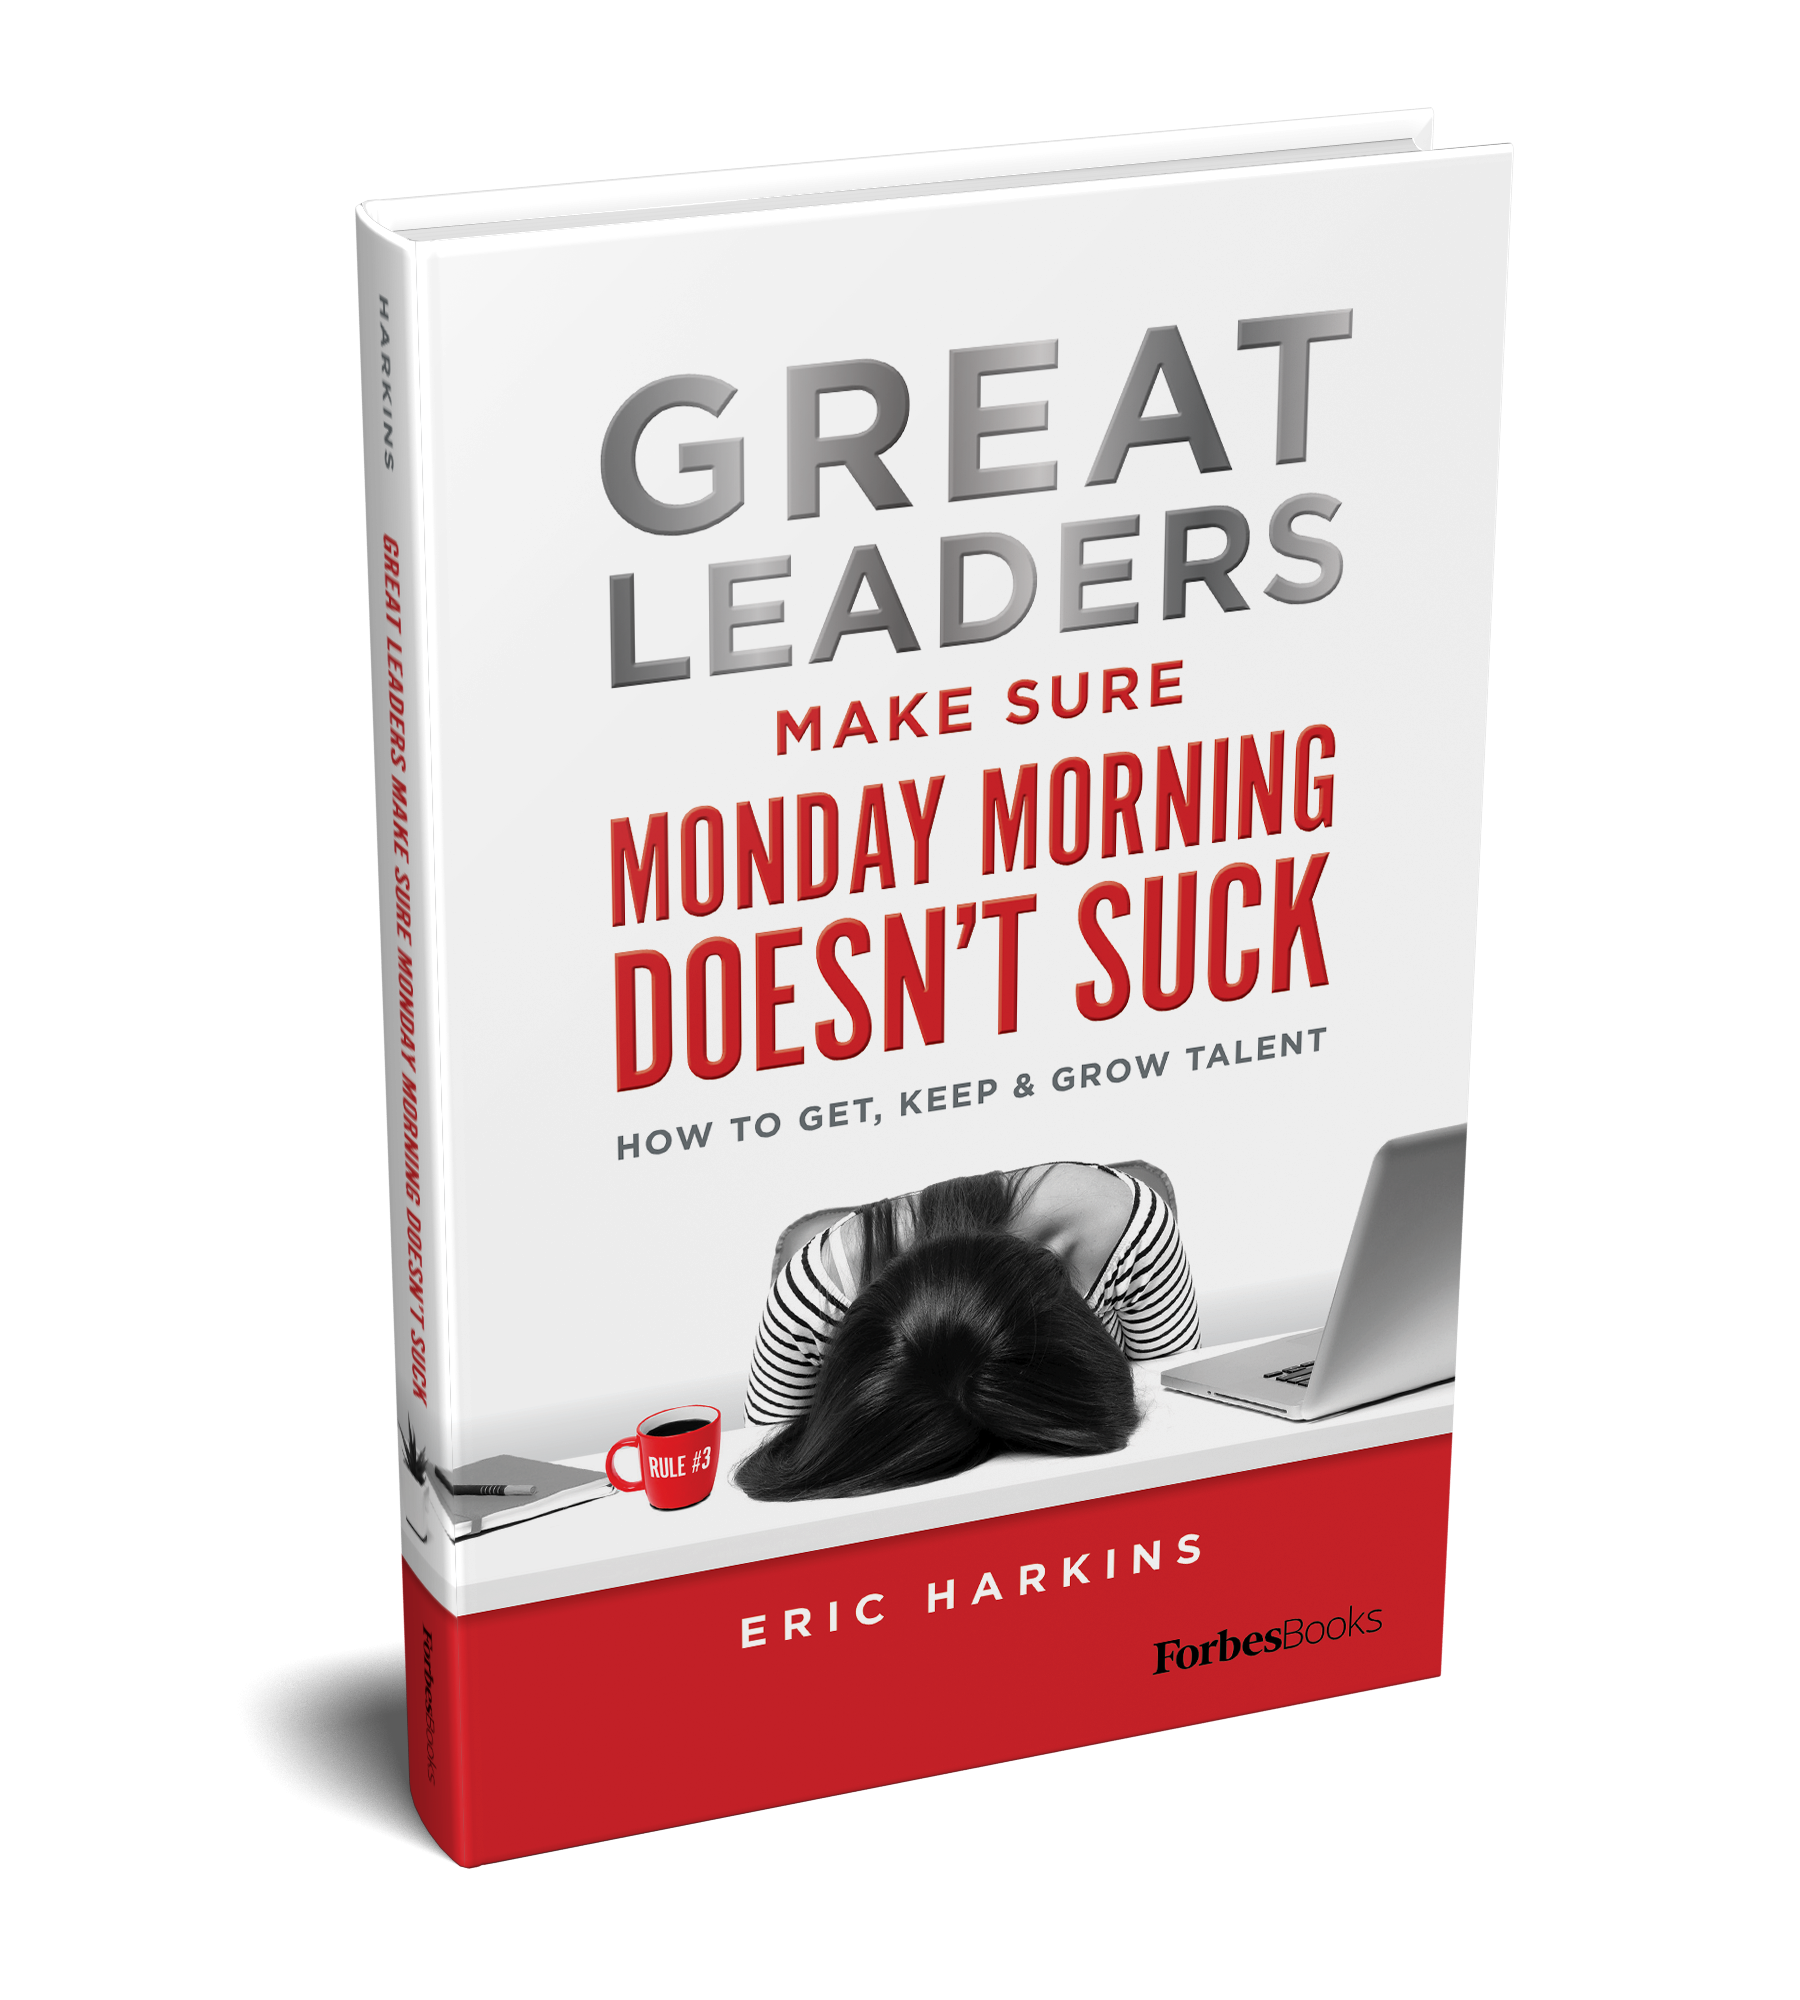 Great Leaders Make Sure Monday Morning Doesn't Suck - book cover